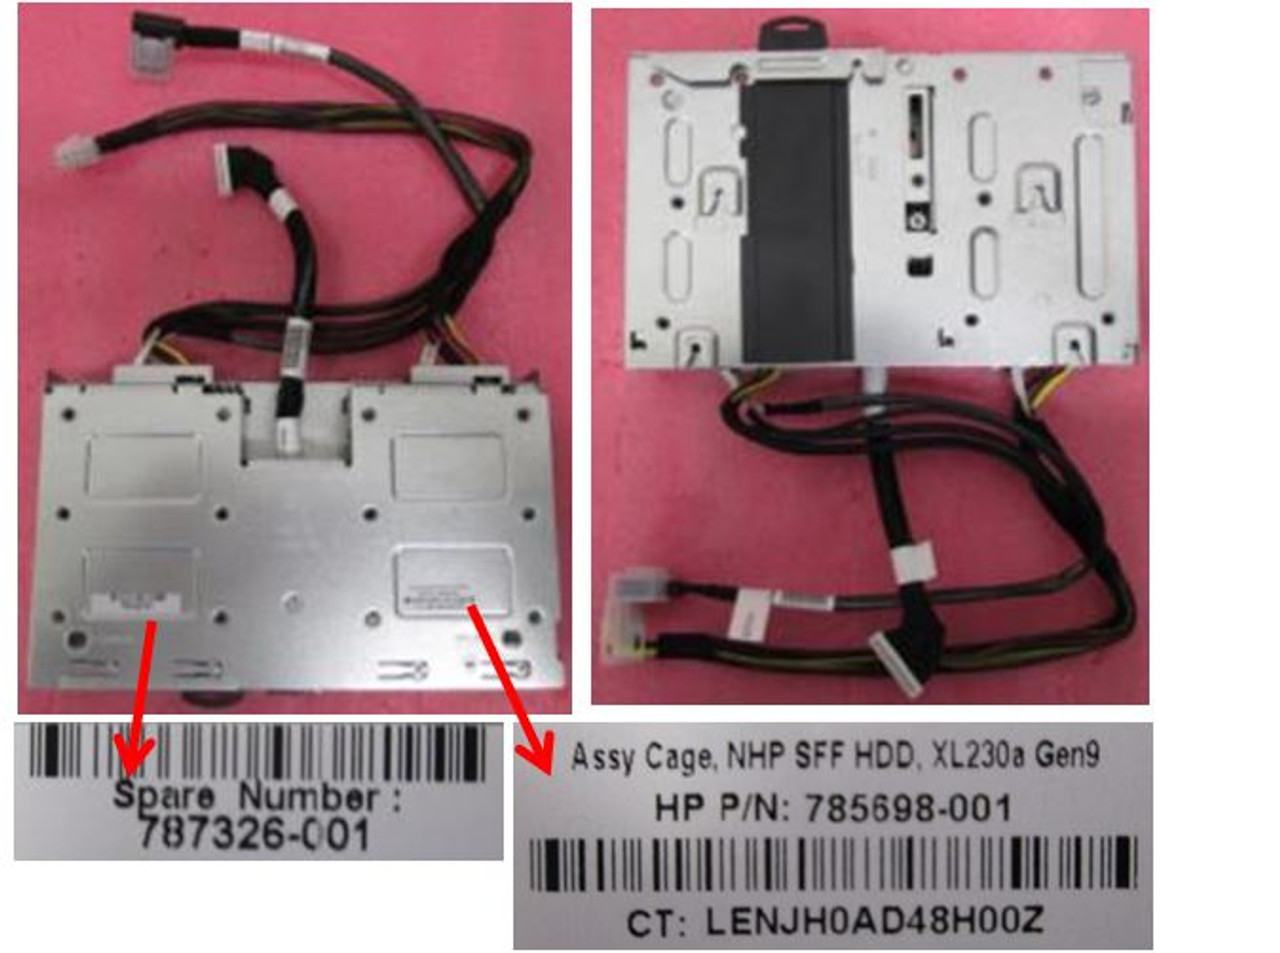 SPS-CAGE ASSY NHP SFF HDD XL230a GEN9 - 787326-001